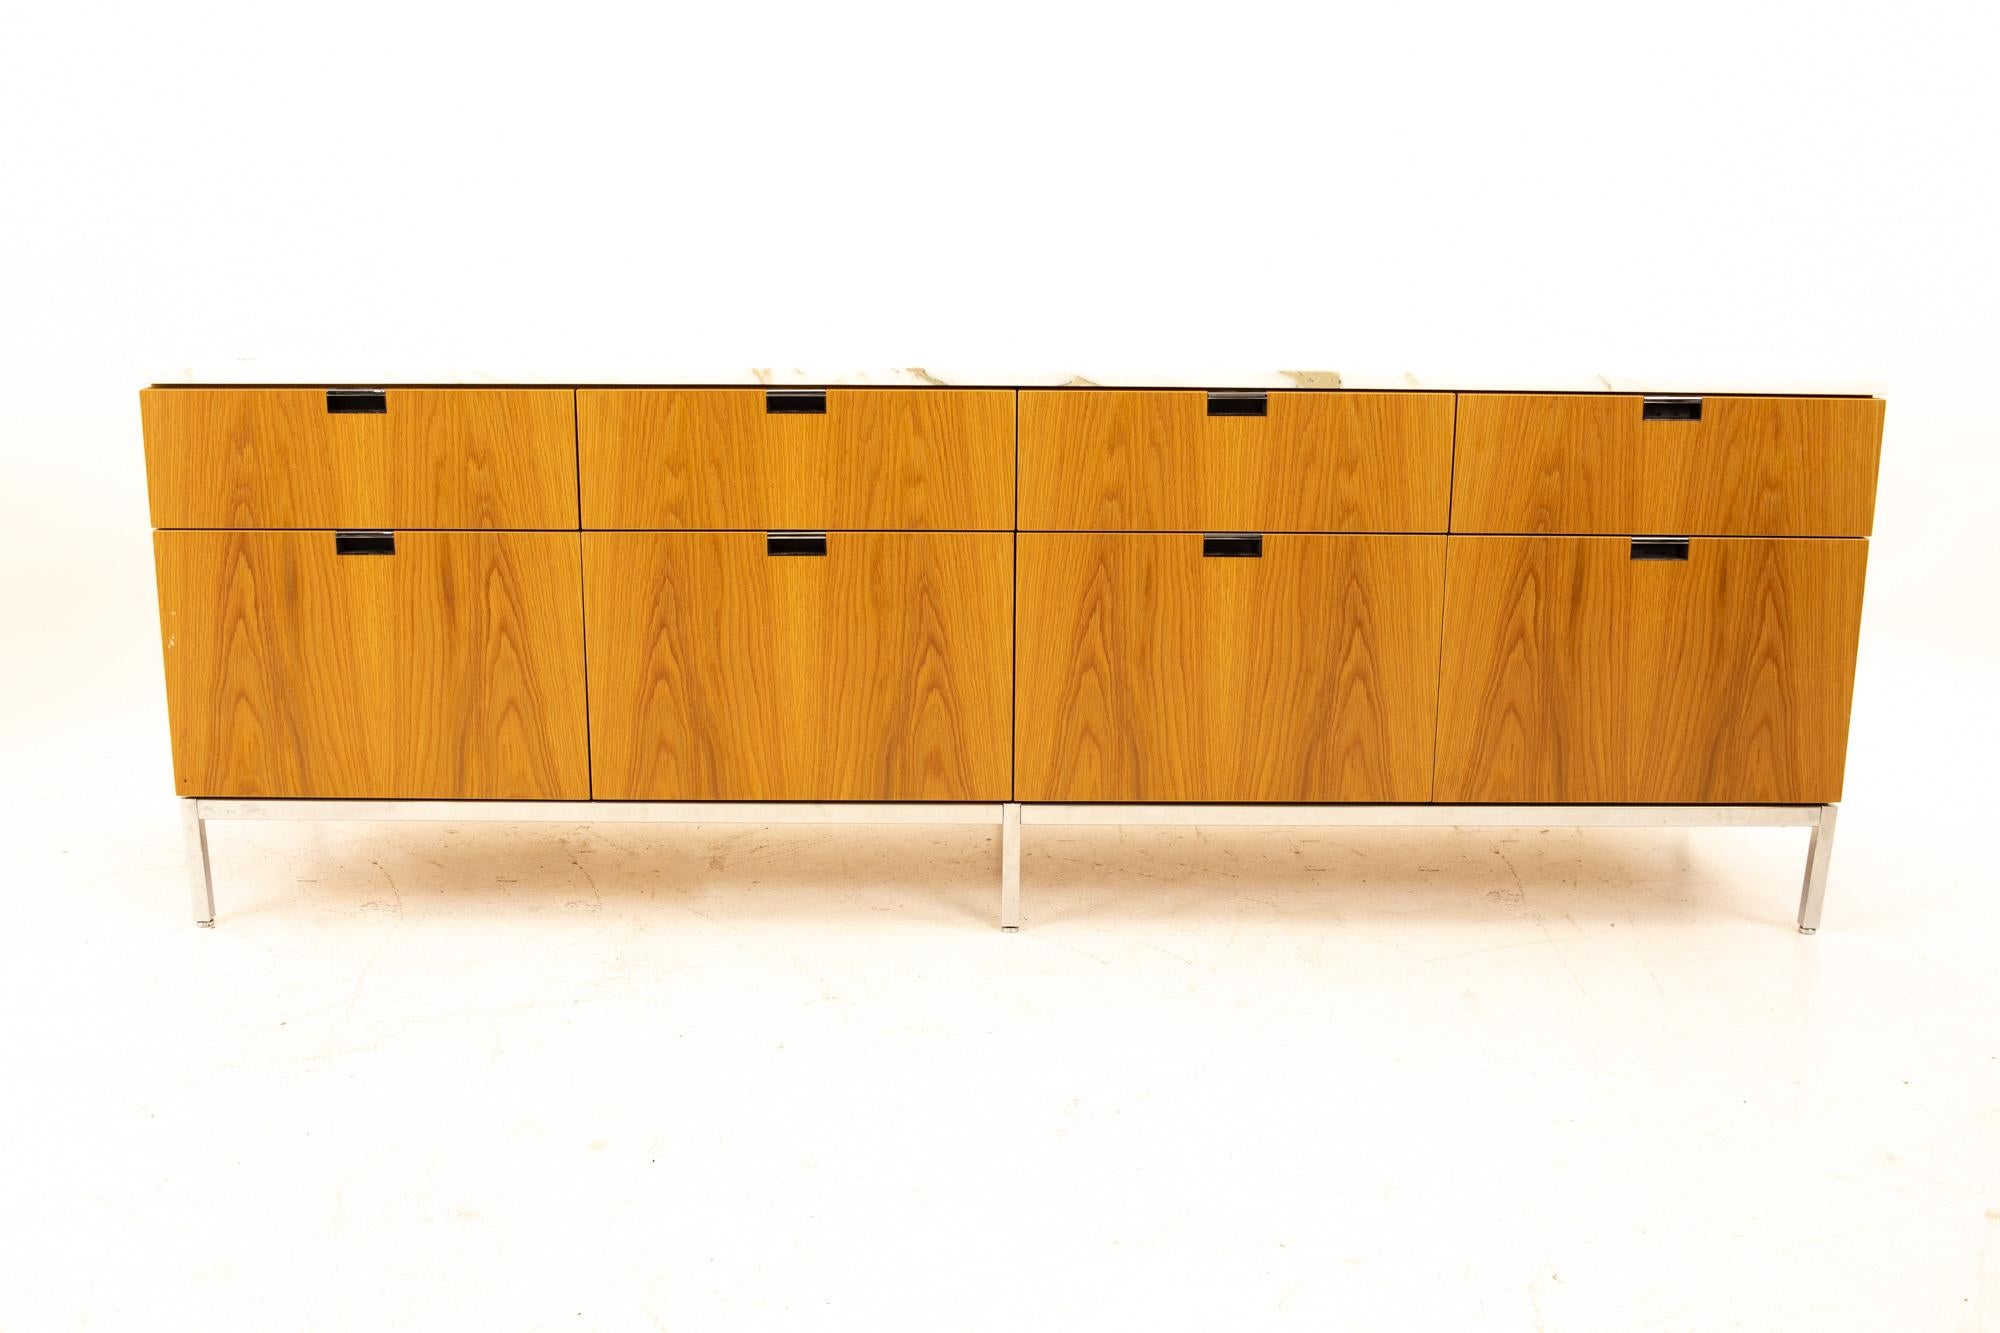 Florence Knoll Mid Century white marble-top sideboard credenza
Credenza measures: 75 wide x 18 deep x 25.5 high

All pieces of furniture can be had in what we call restored vintage condition. That means the piece is restored upon purchase so it’s